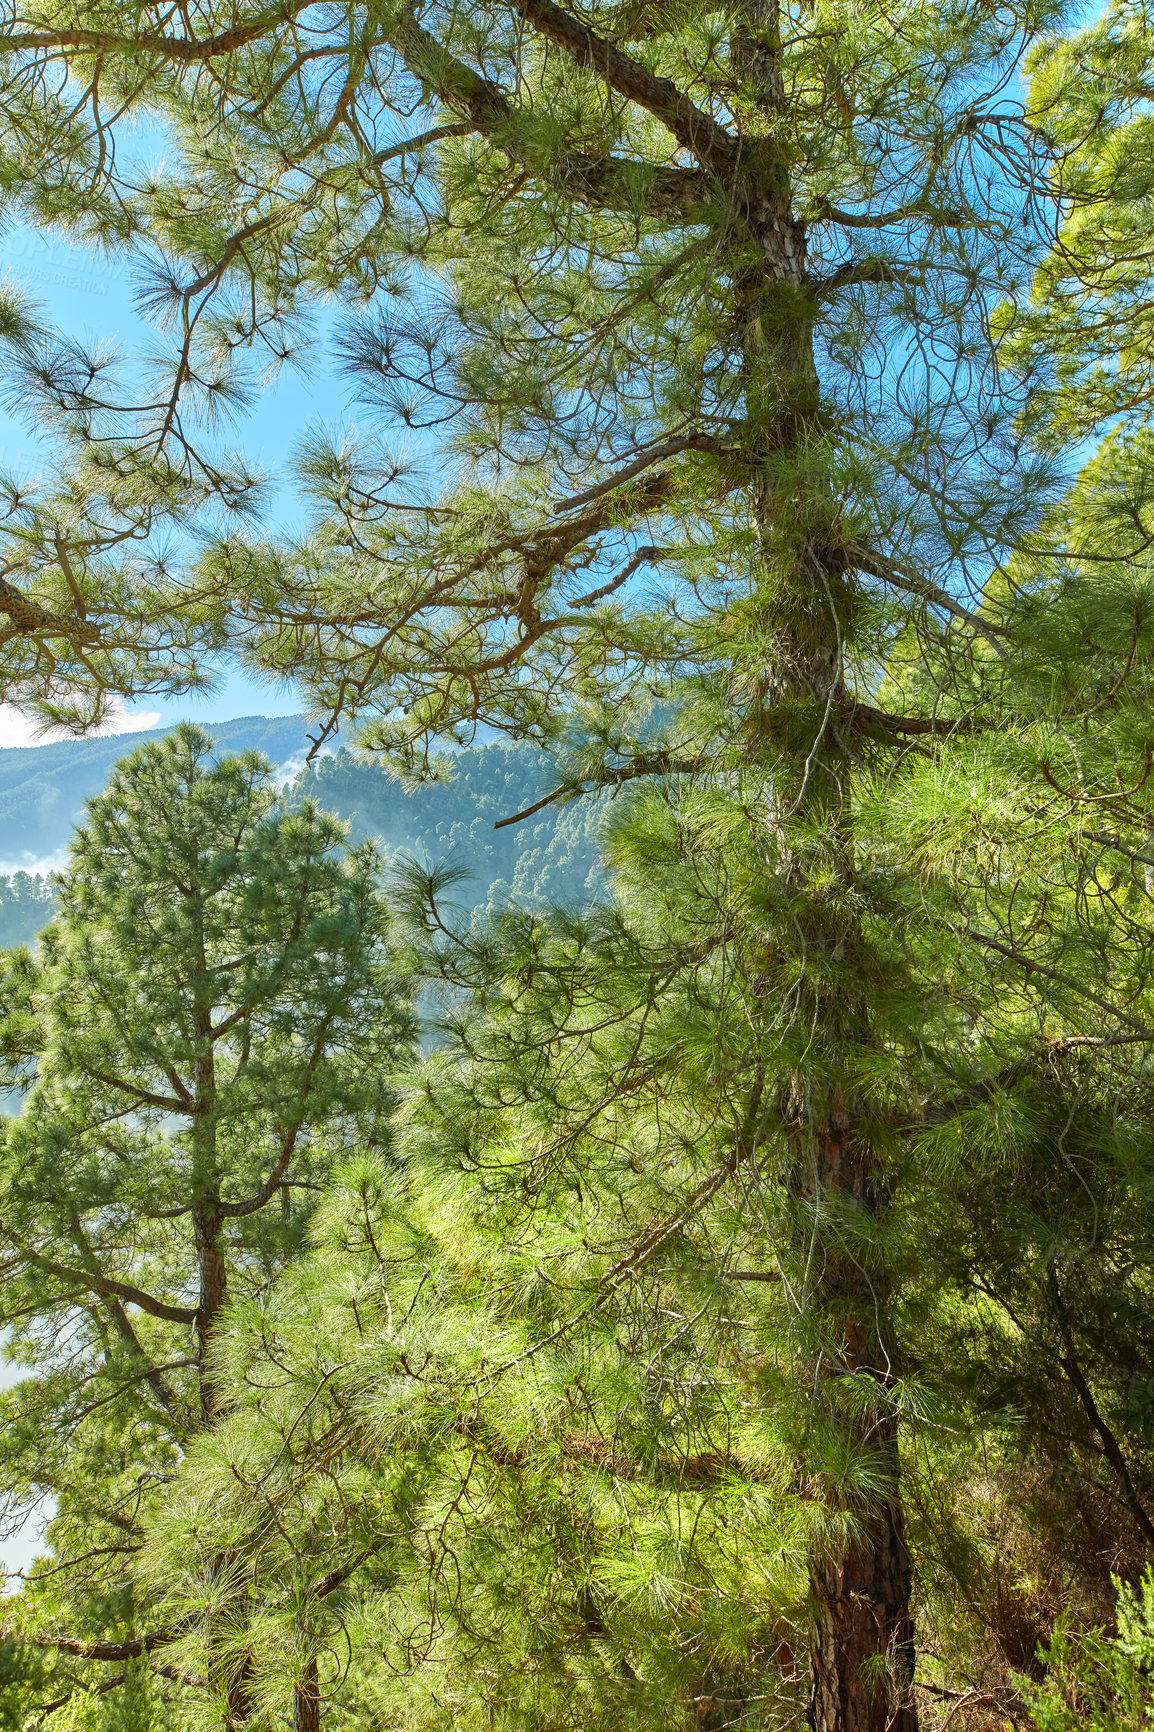 Buy stock photo Closeup view of a pine forest in the mountains on a sunny day with a clear blue sky. Lush trees and greenery in a secluded nature scene. Tourism or hiking scenery in La Palma, Canary Islands, Spain